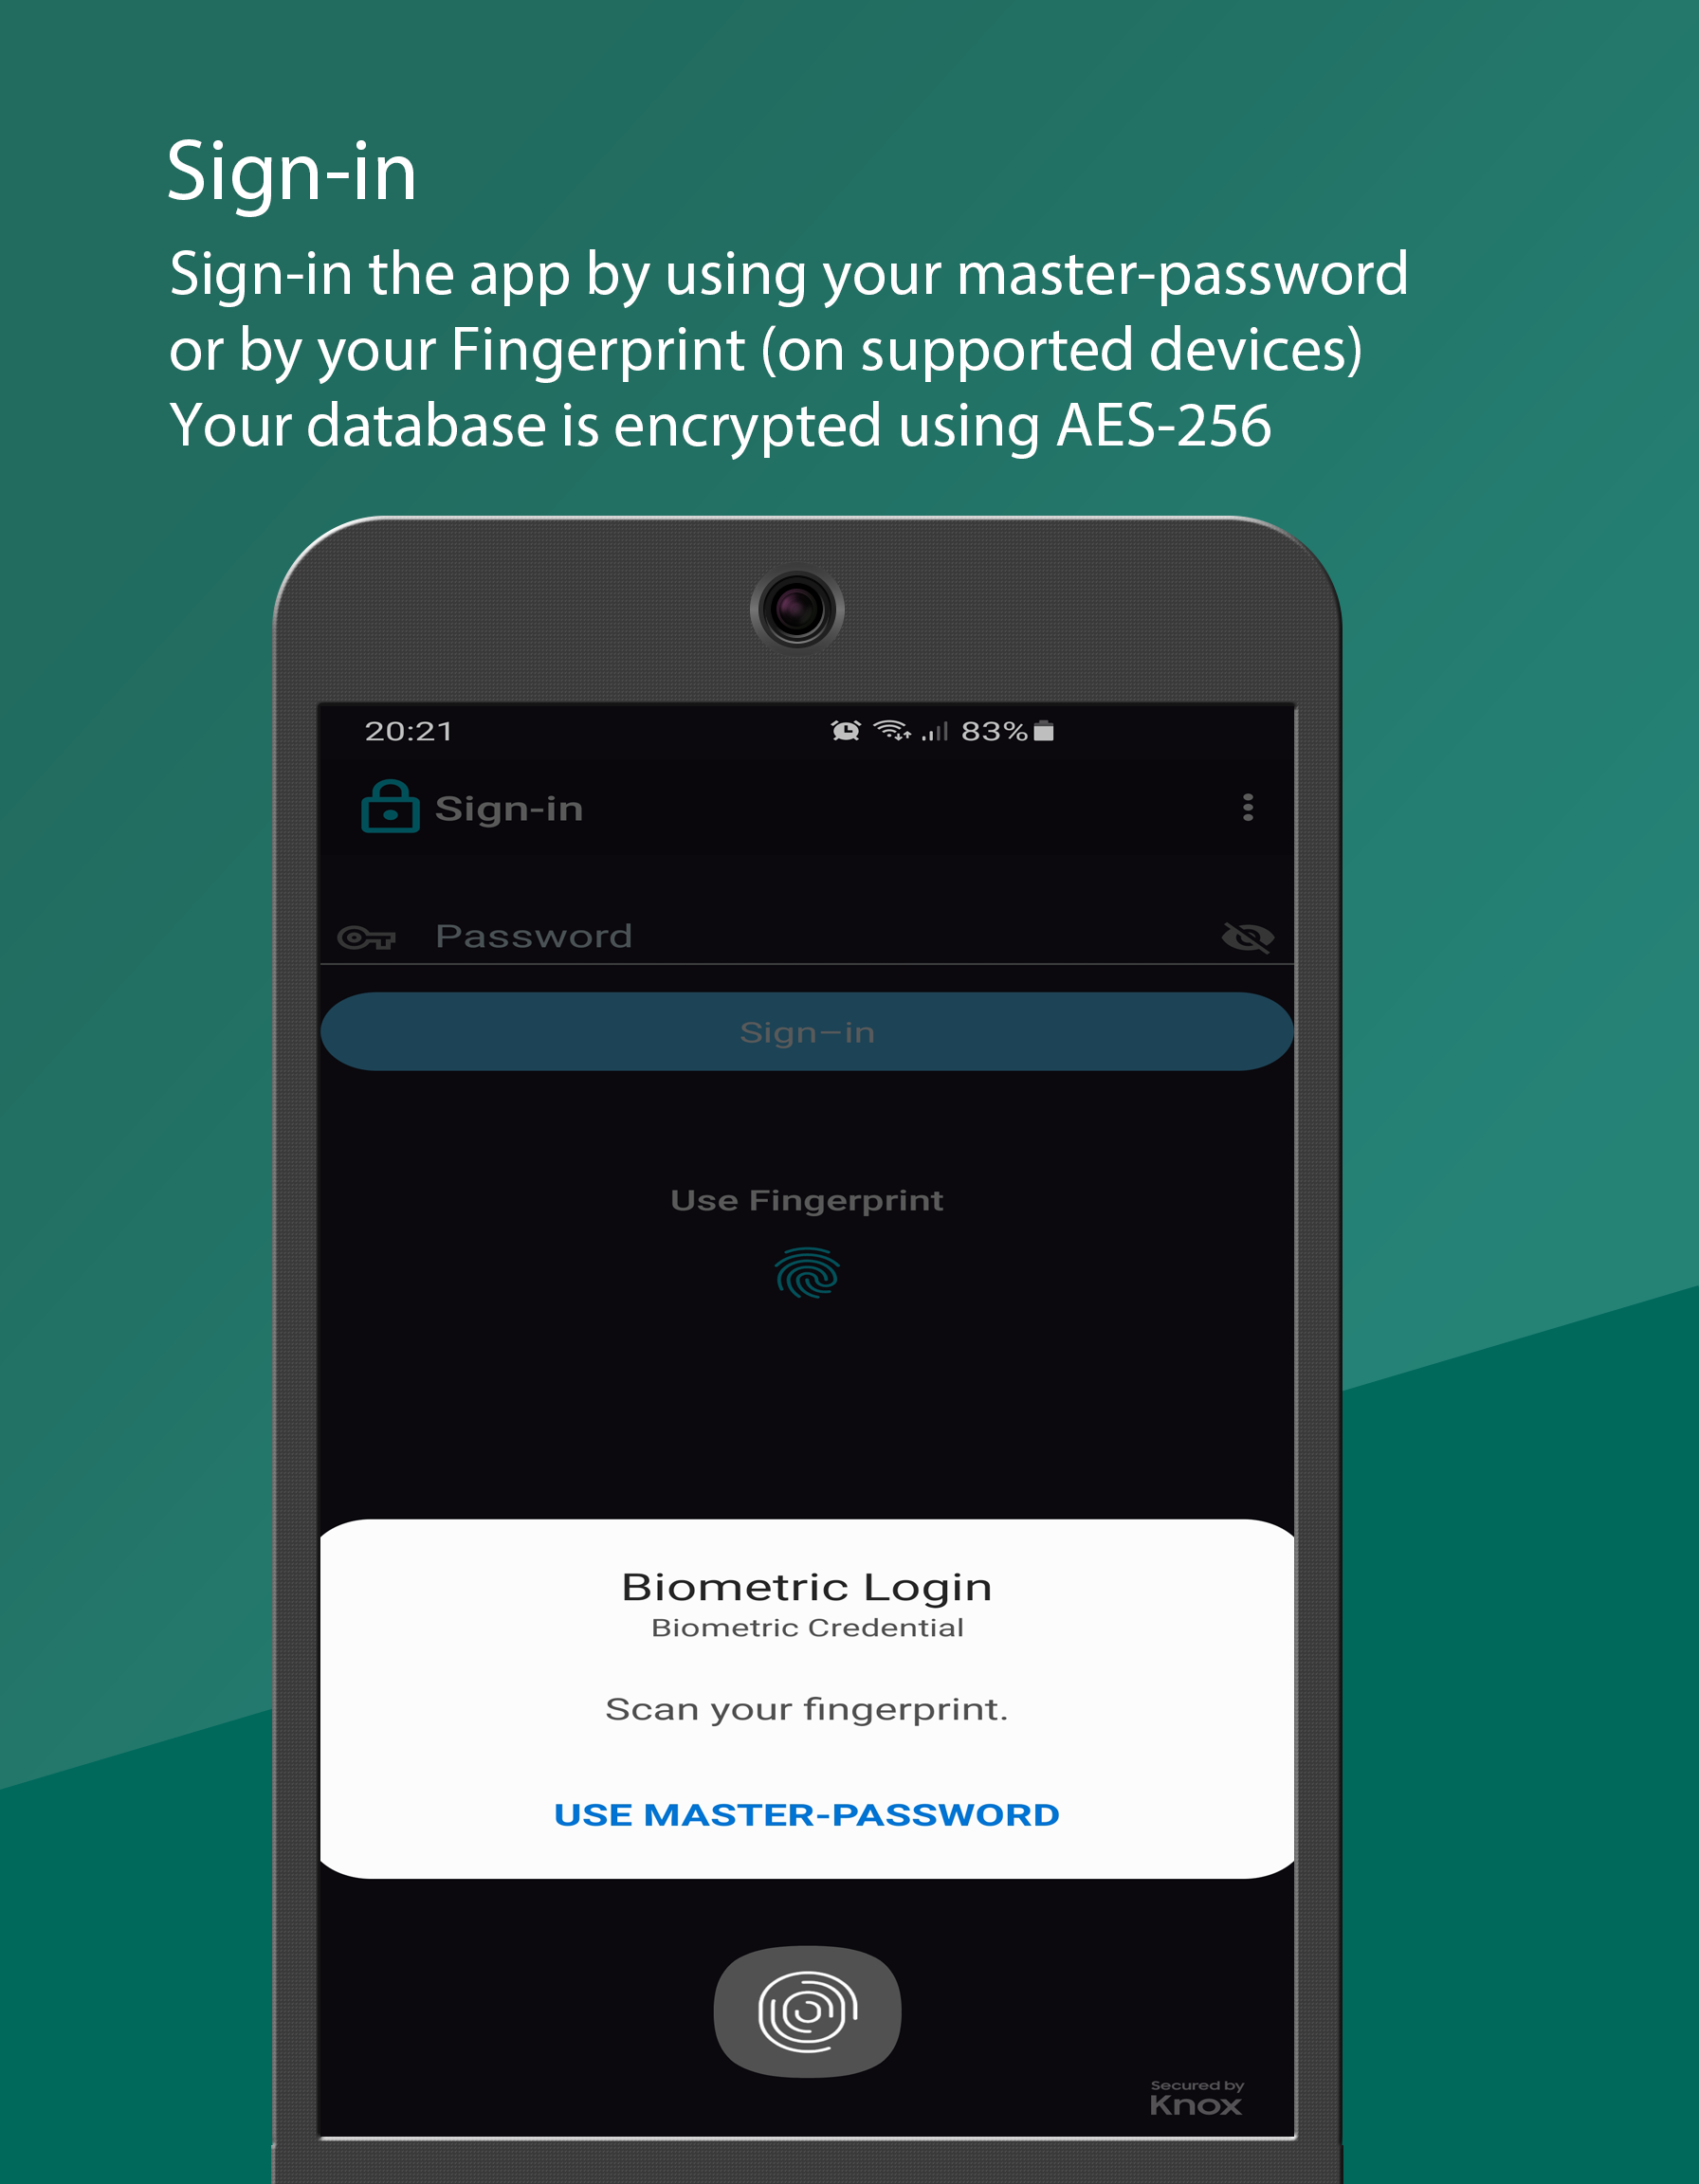 Sign-in the app with your Master-Password or with Biometric credentials